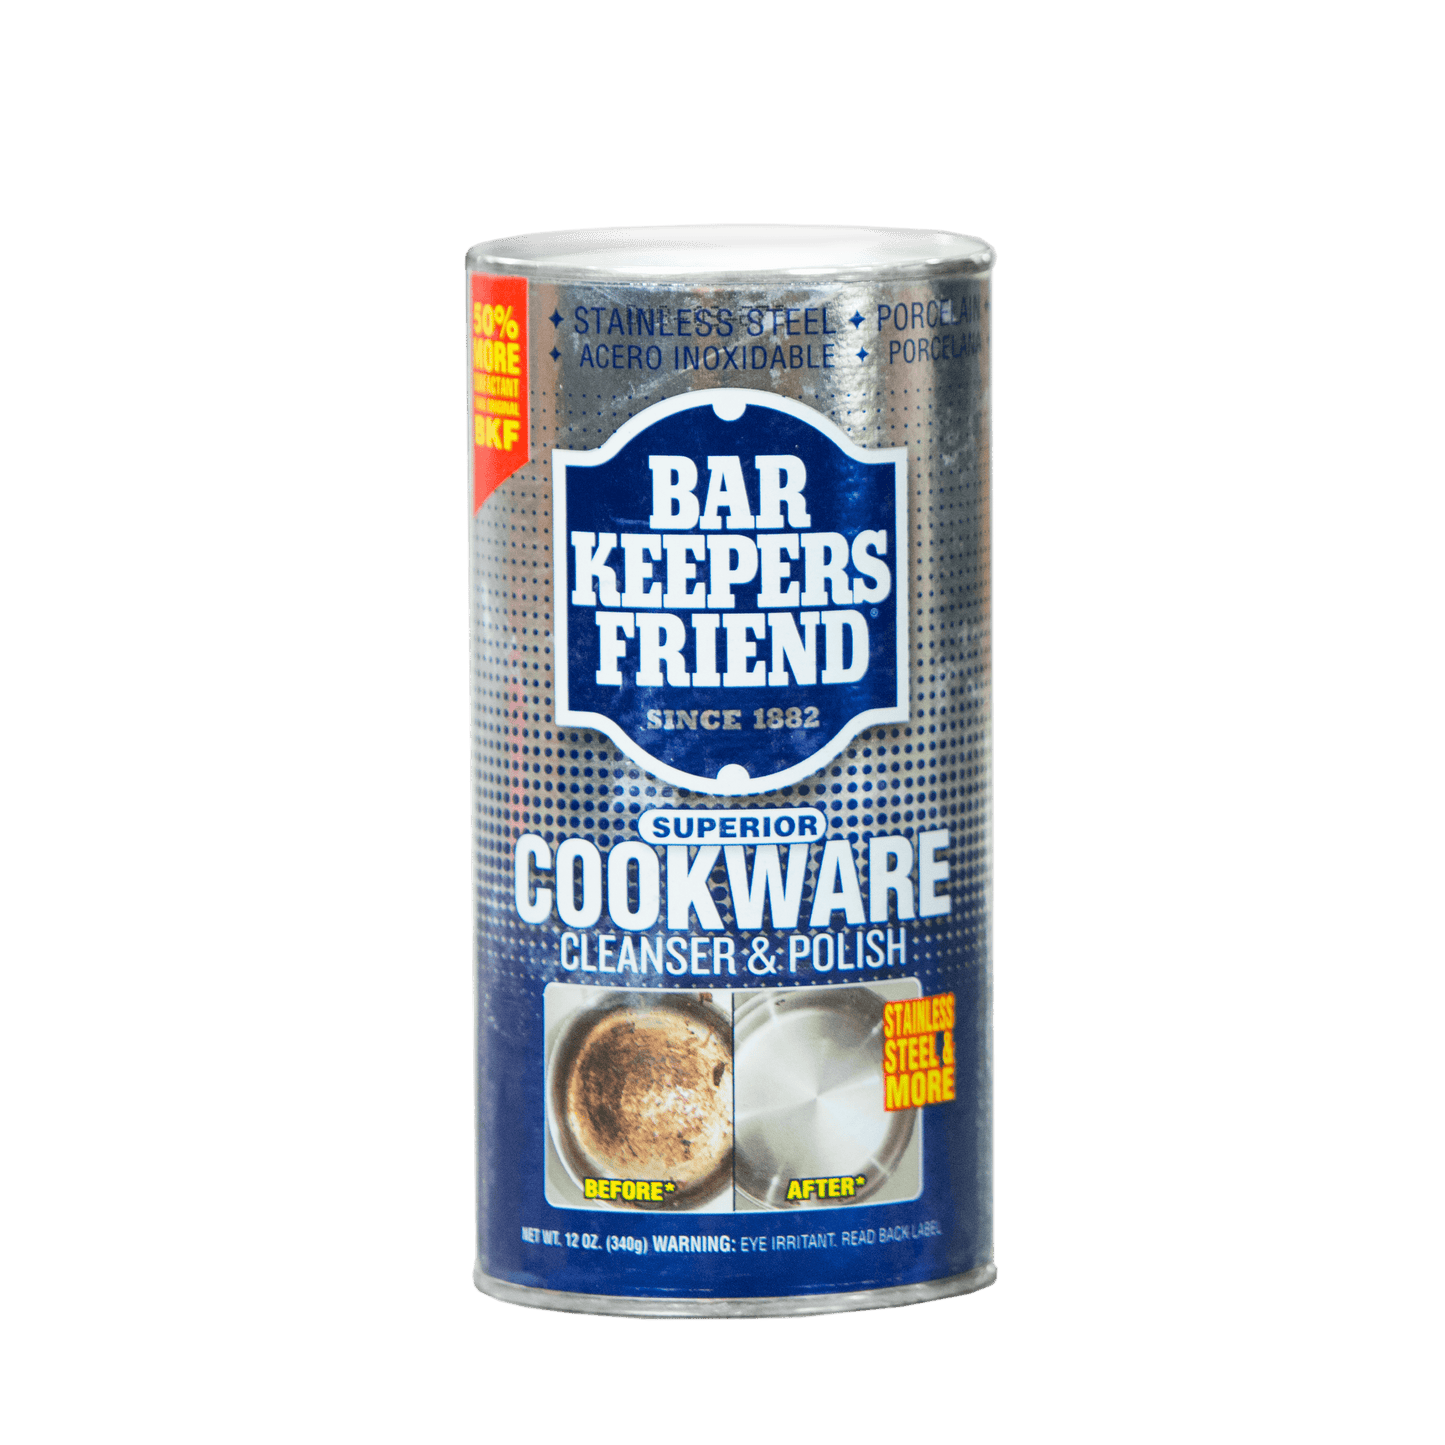 BAR KEEPERS FRIEND Powder Cleanser and Polish - Cookware, 12 oz